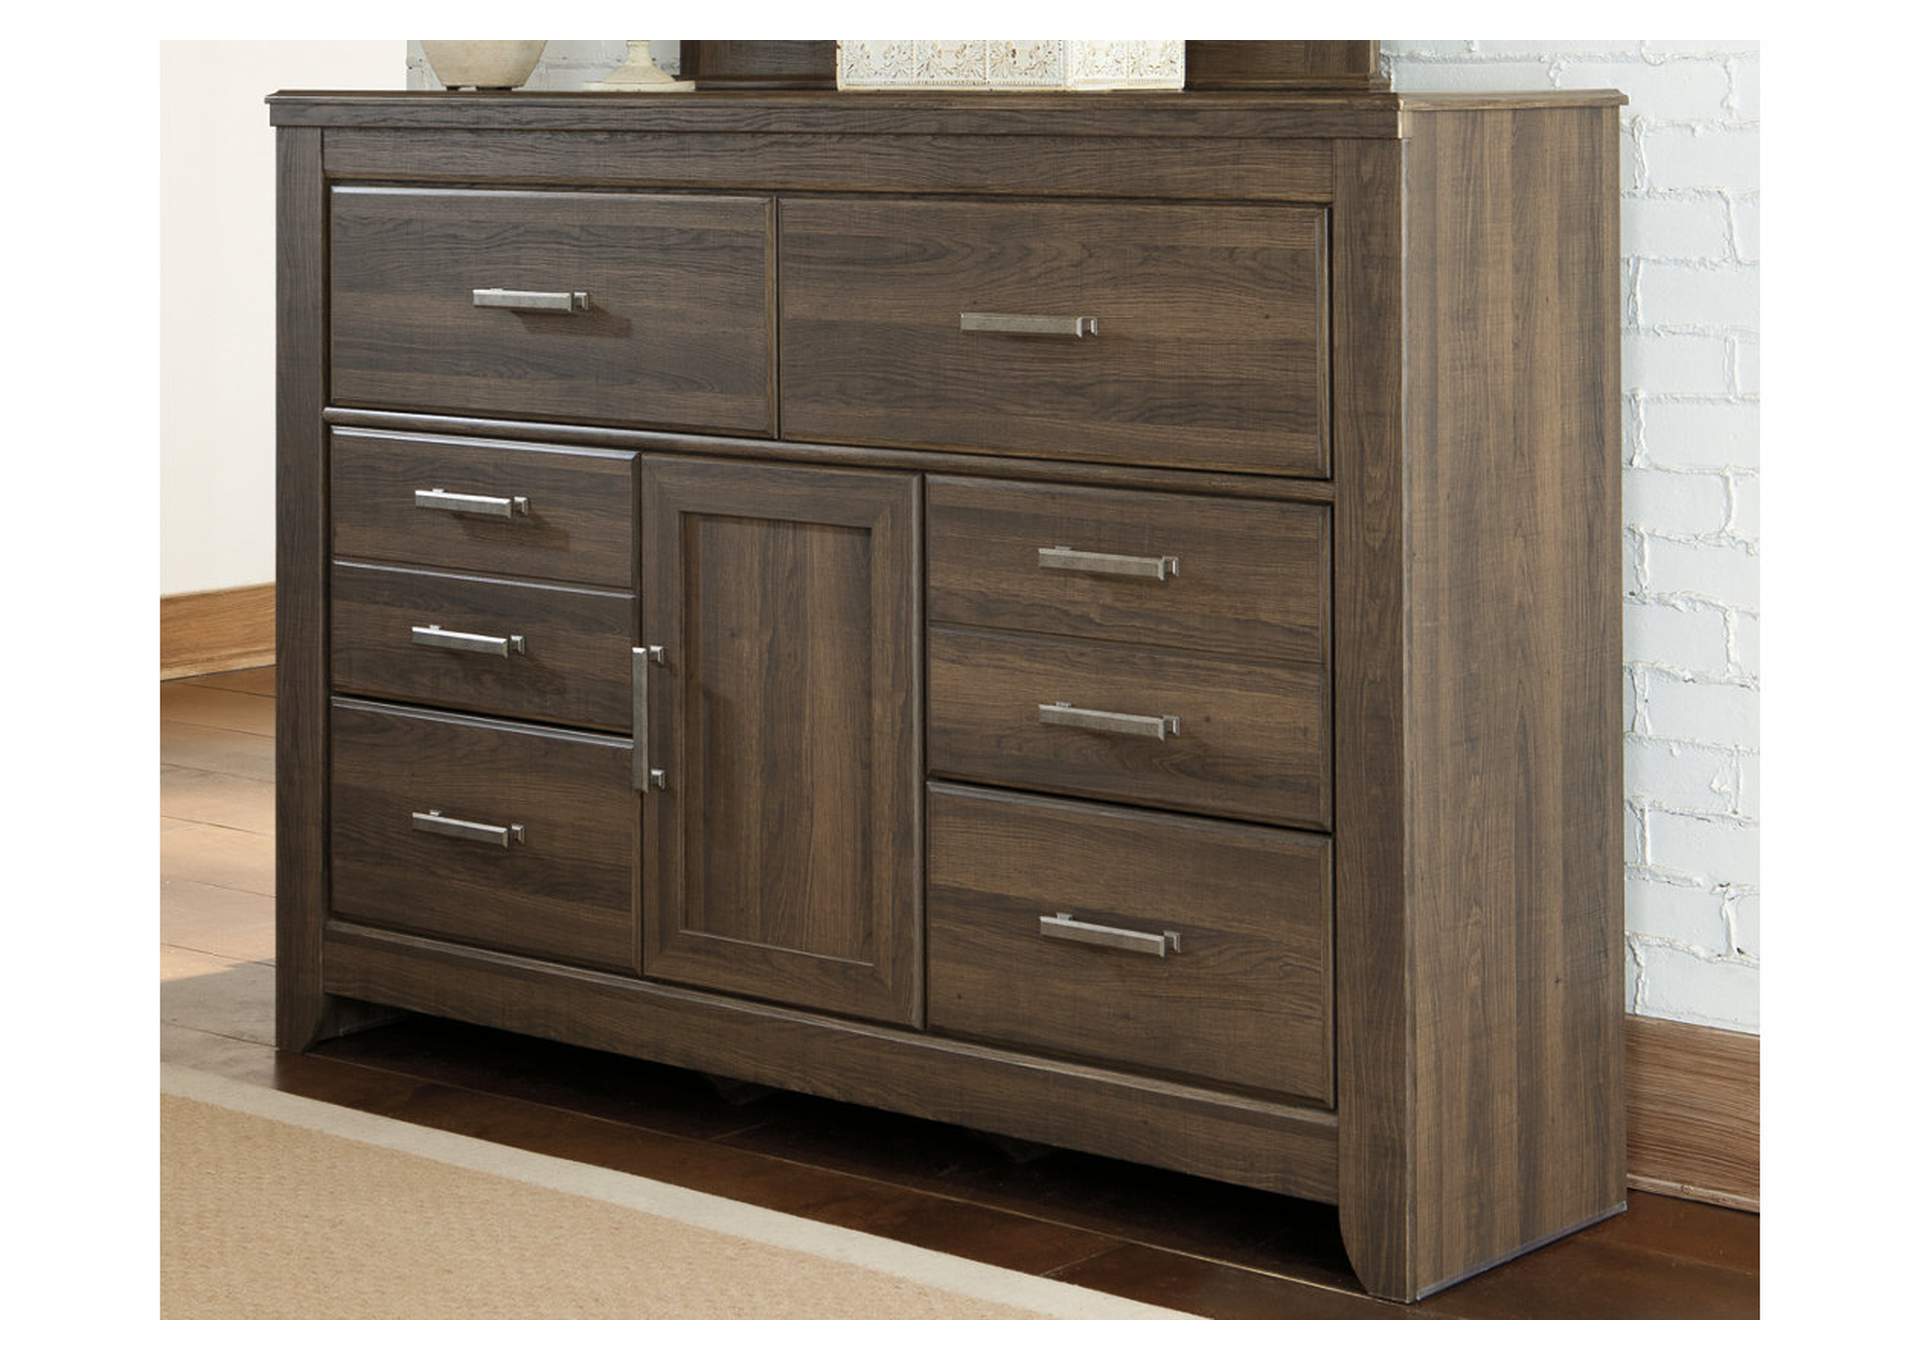 Juararo Queen Poster Bed with Dresser,Signature Design By Ashley